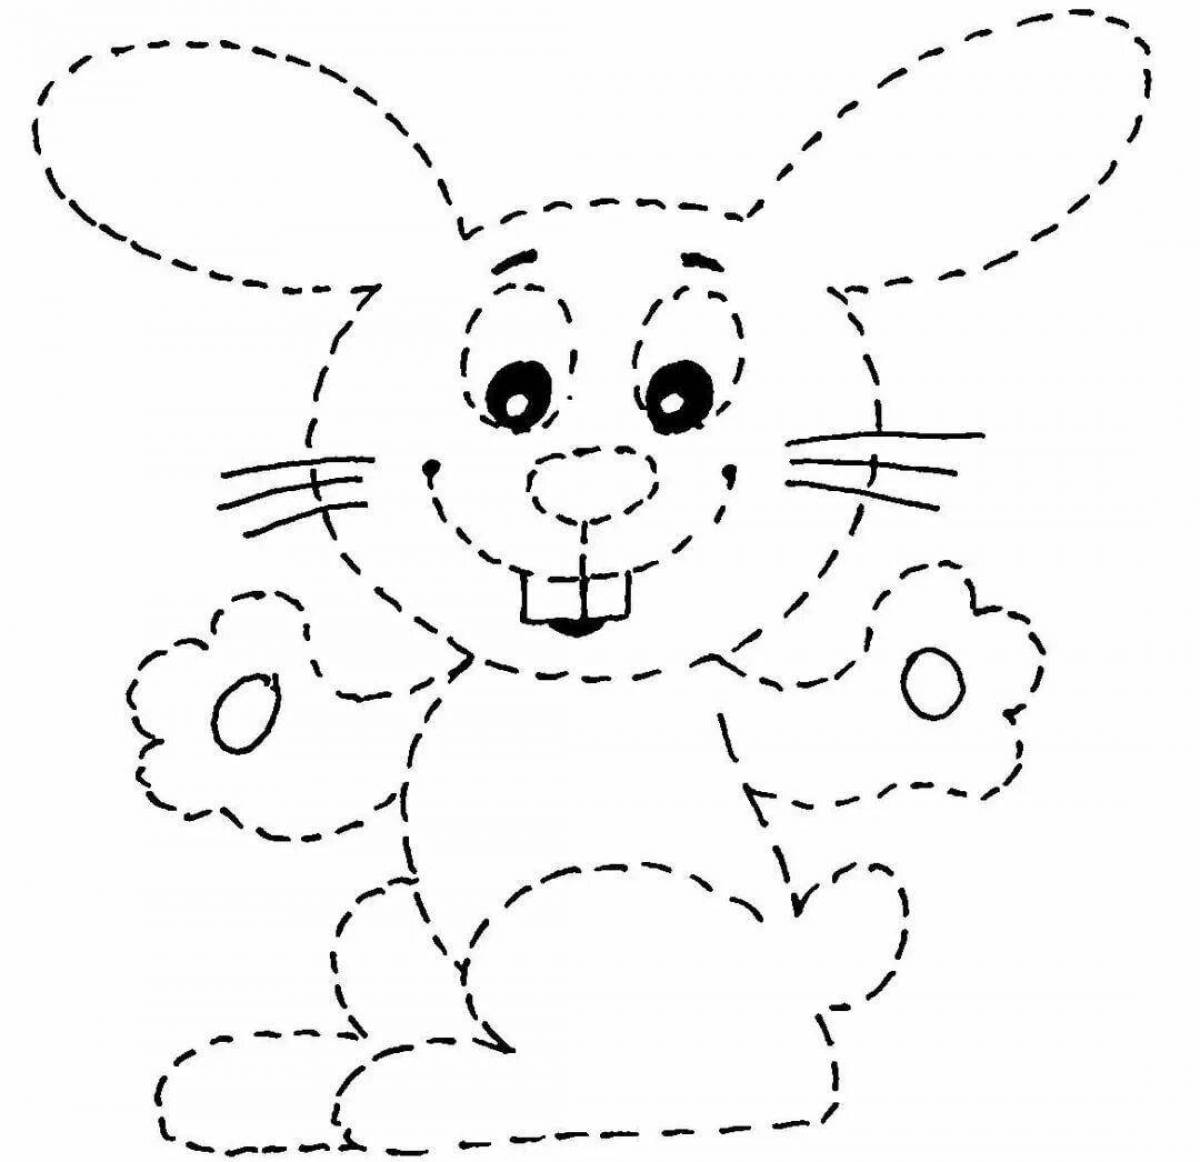 Crazy outline coloring page for 3-4 year olds